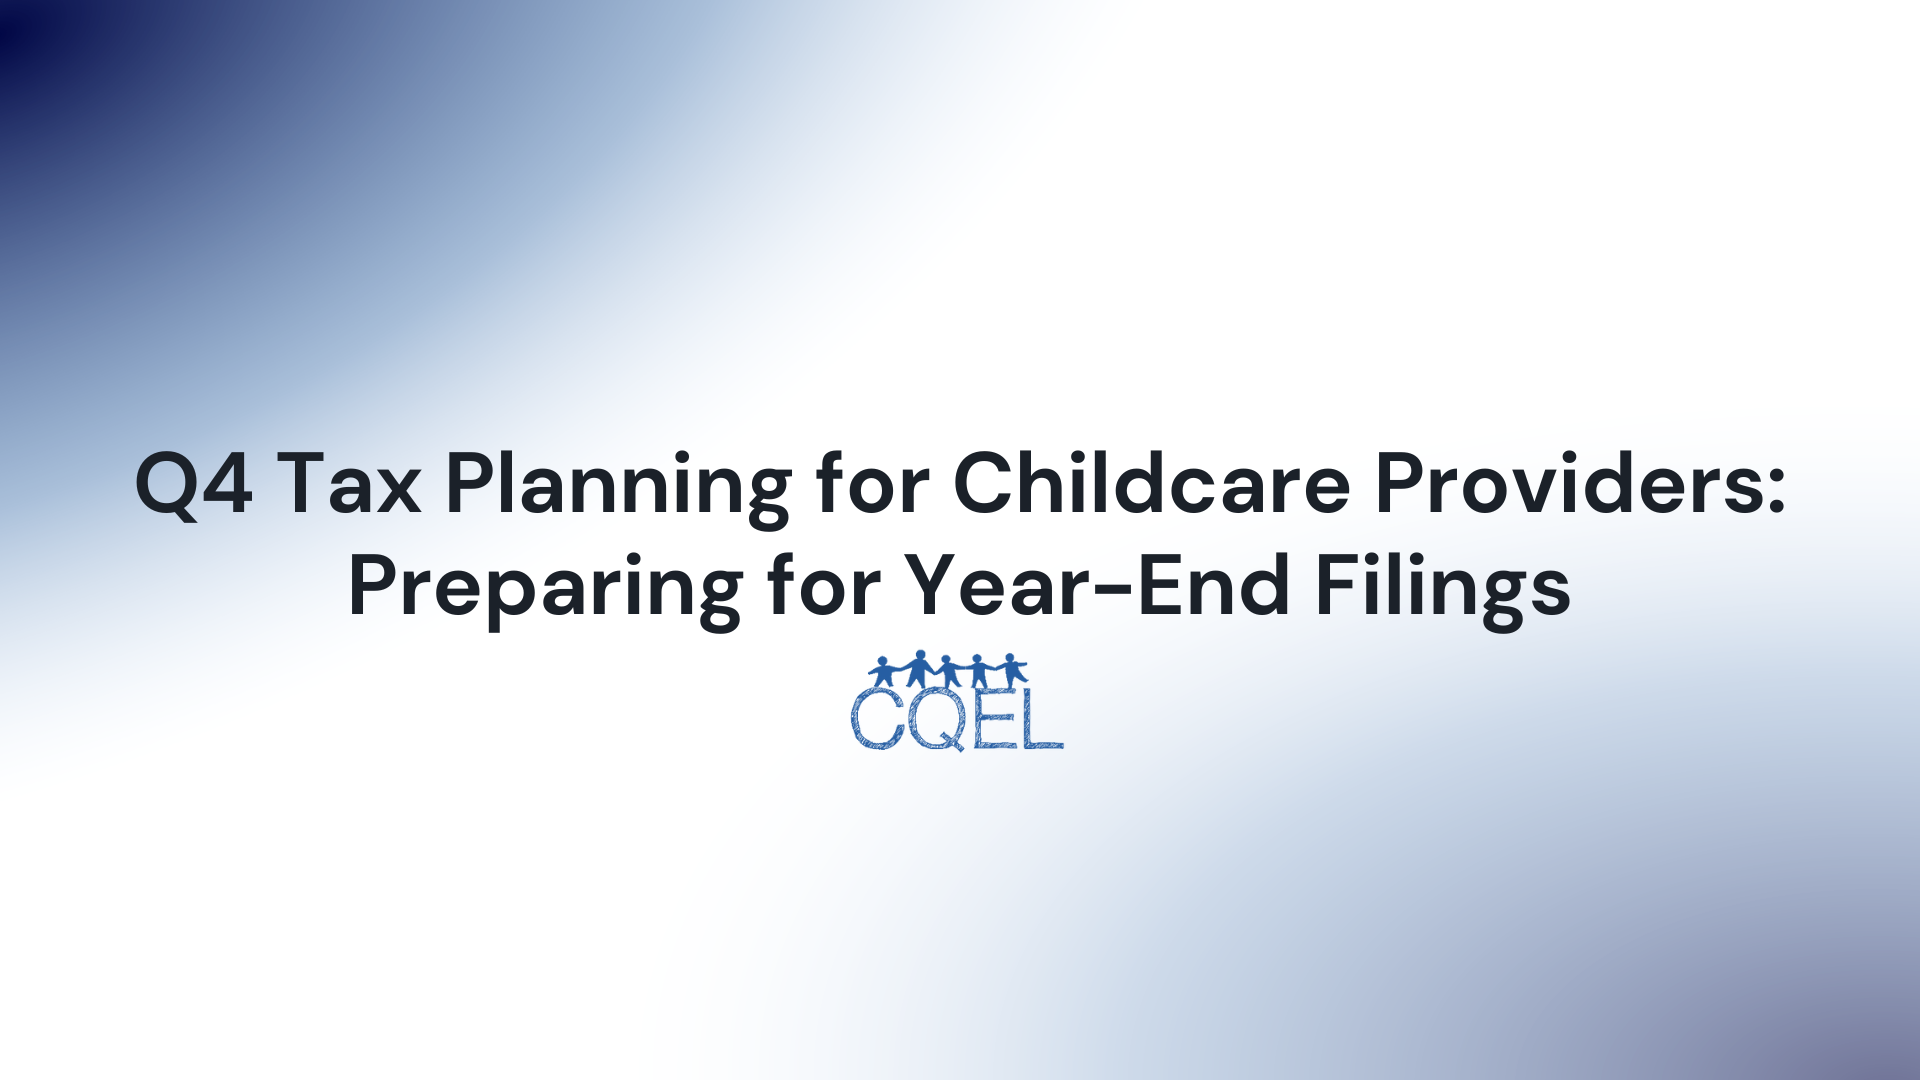 Q4 Tax Planning for Childcare Providers: Preparing for Year-End Filings